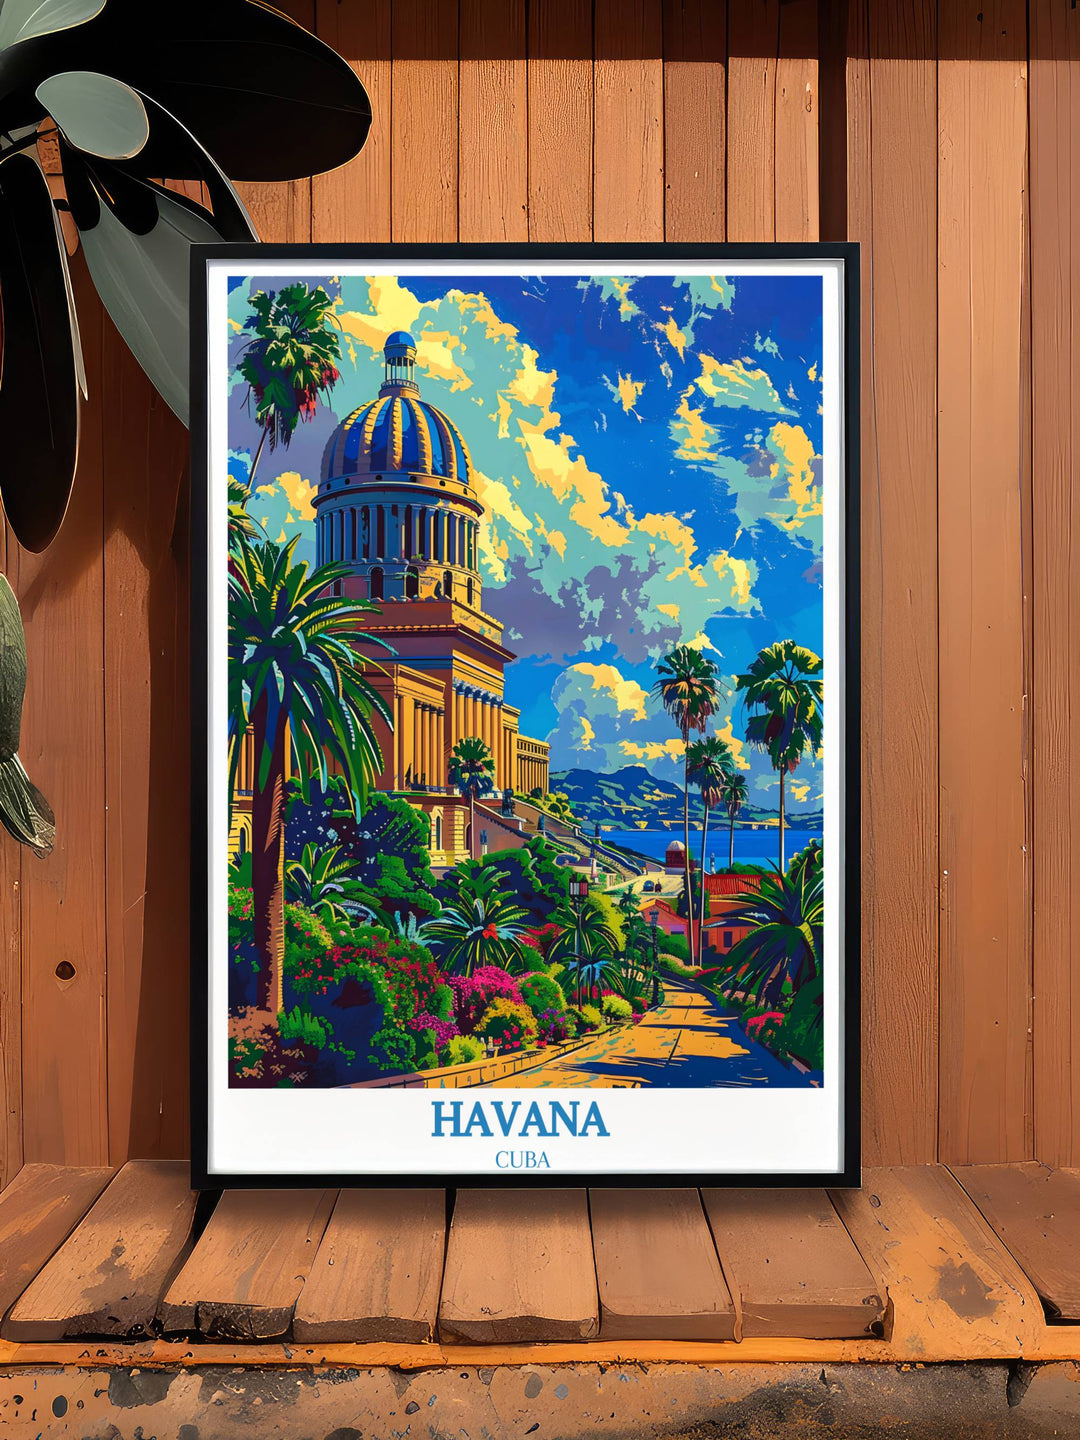 A Havana travel poster that draws the eye directly to the majestic National Capitol of Cuba, standing tall amidst the citys lively atmosphere, inviting viewers to explore its historical and architectural marvels.